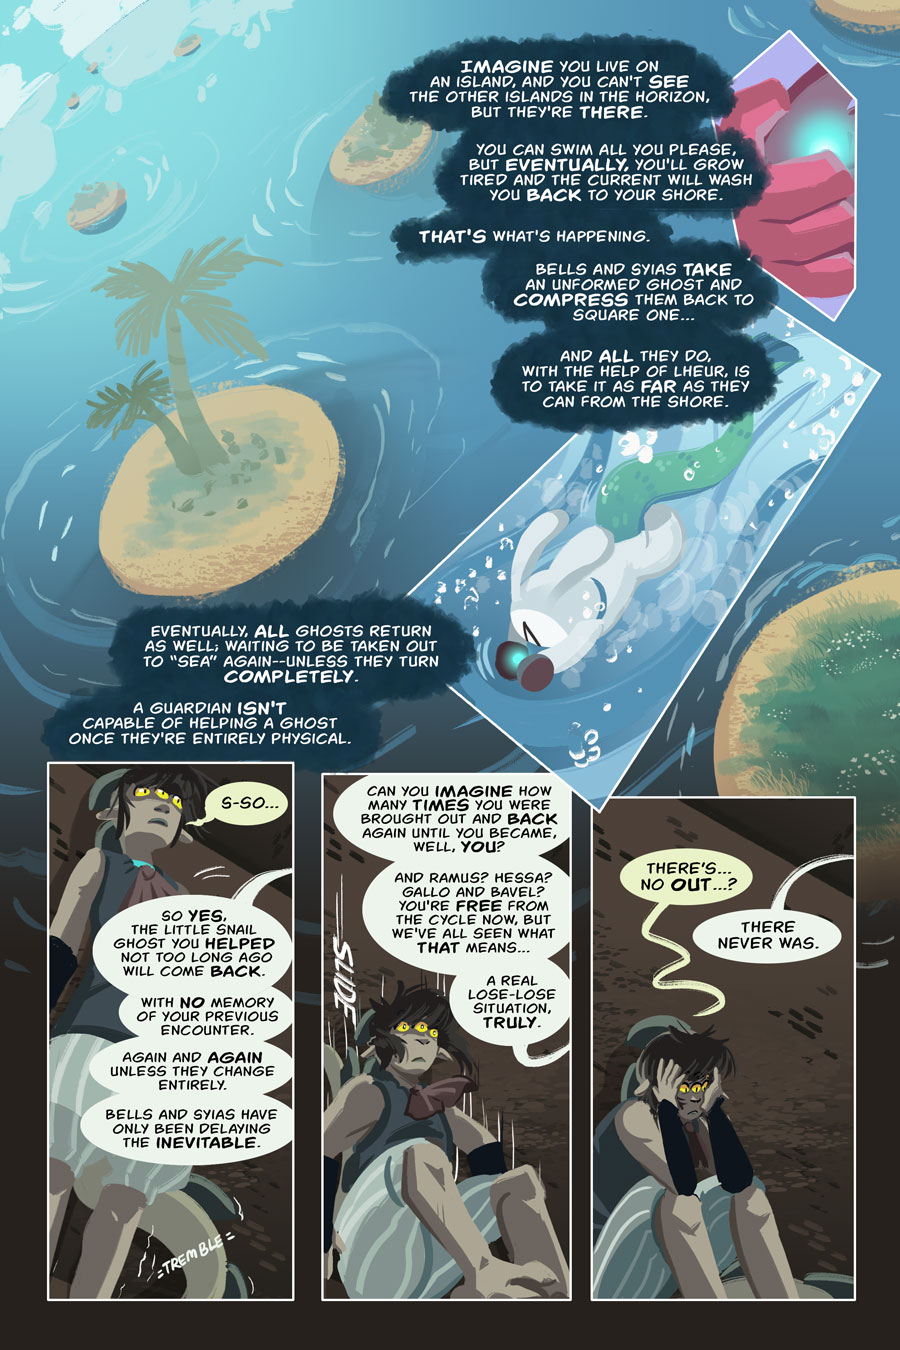 Chapter 8, page 32